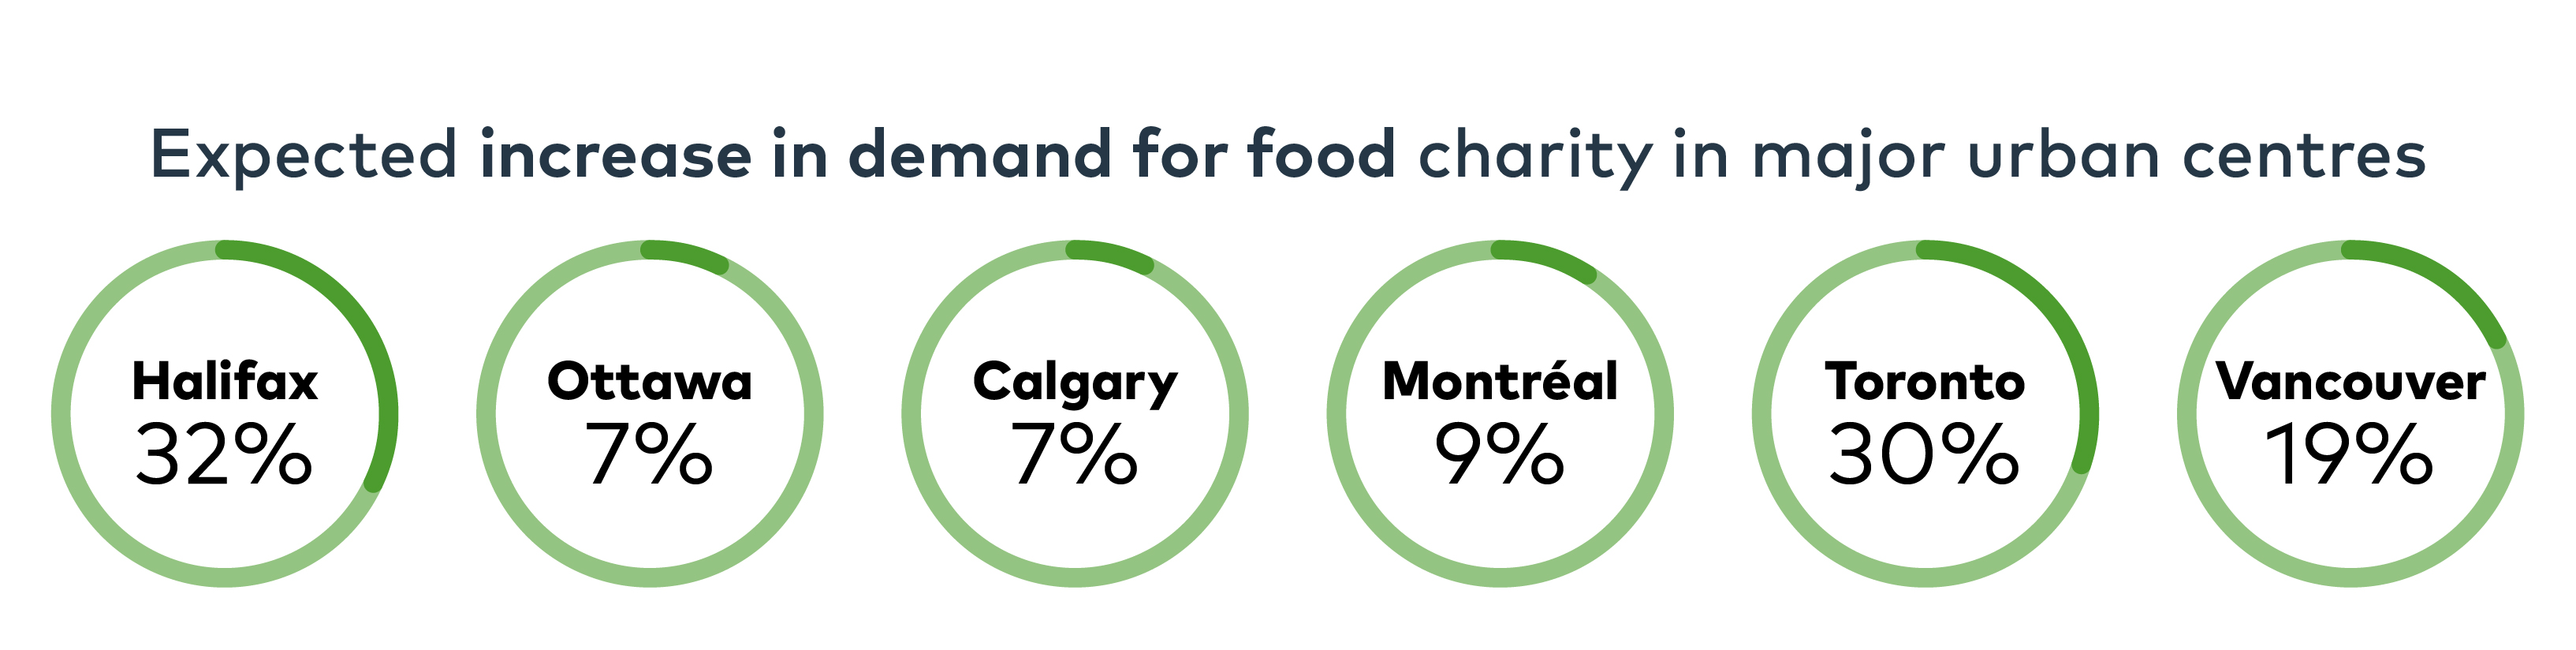 Expected increase in demand for food charity in major urban centres. Halifax 32%. Ottawa 7%. Calgary 7%. Montreal 9%. Toronto 30%. Vancouver 19%.